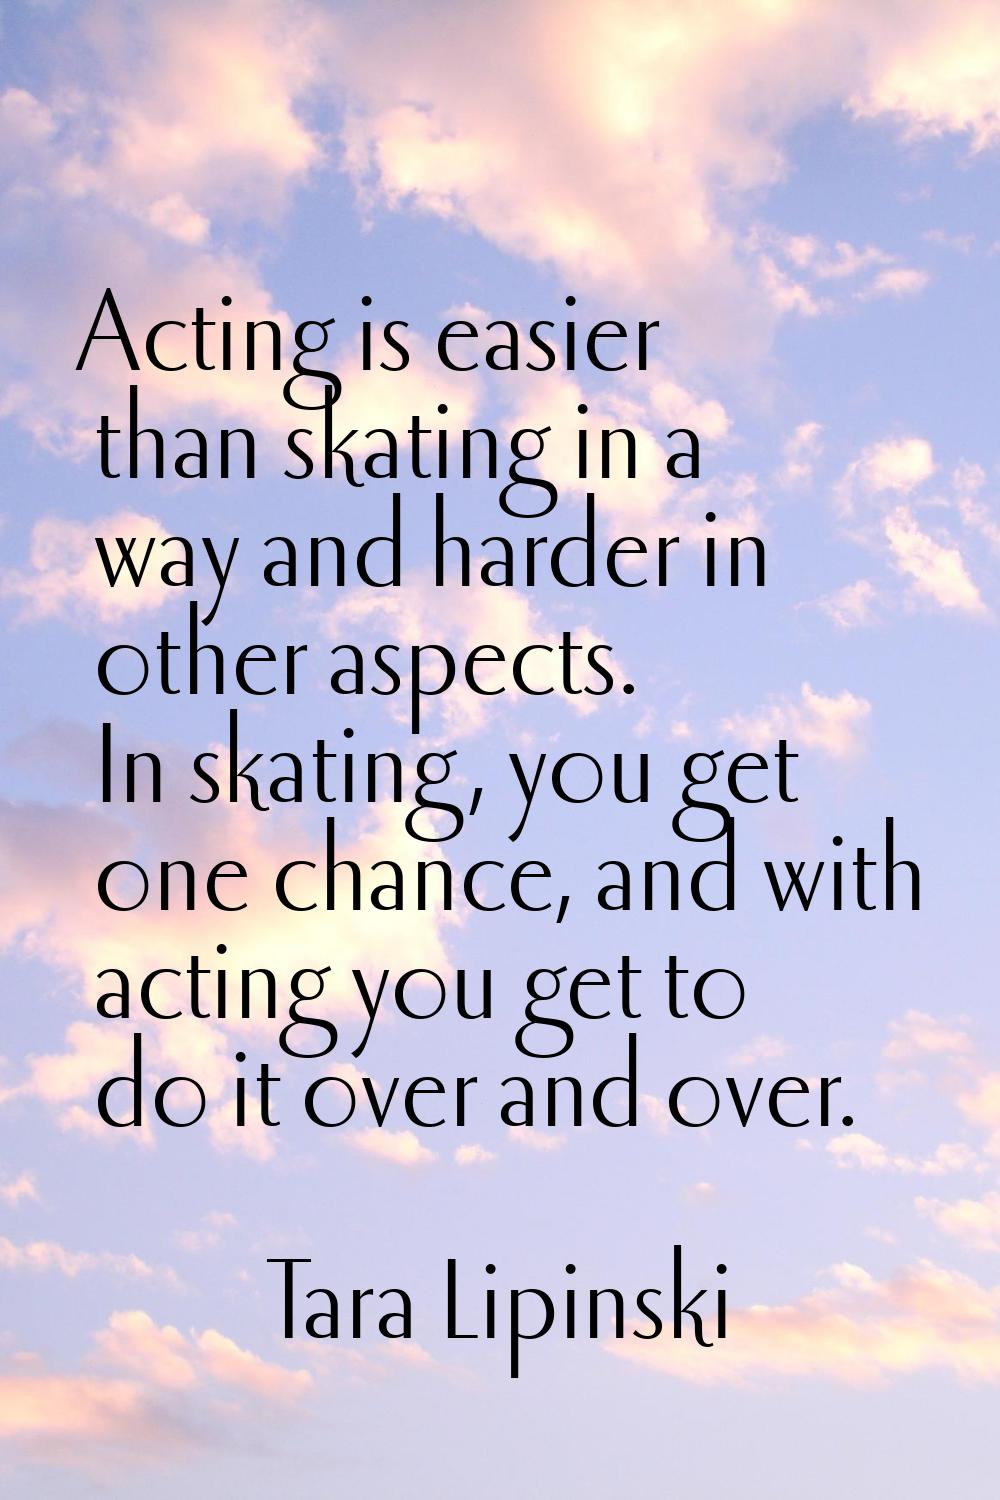 Acting is easier than skating in a way and harder in other aspects. In skating, you get one chance,